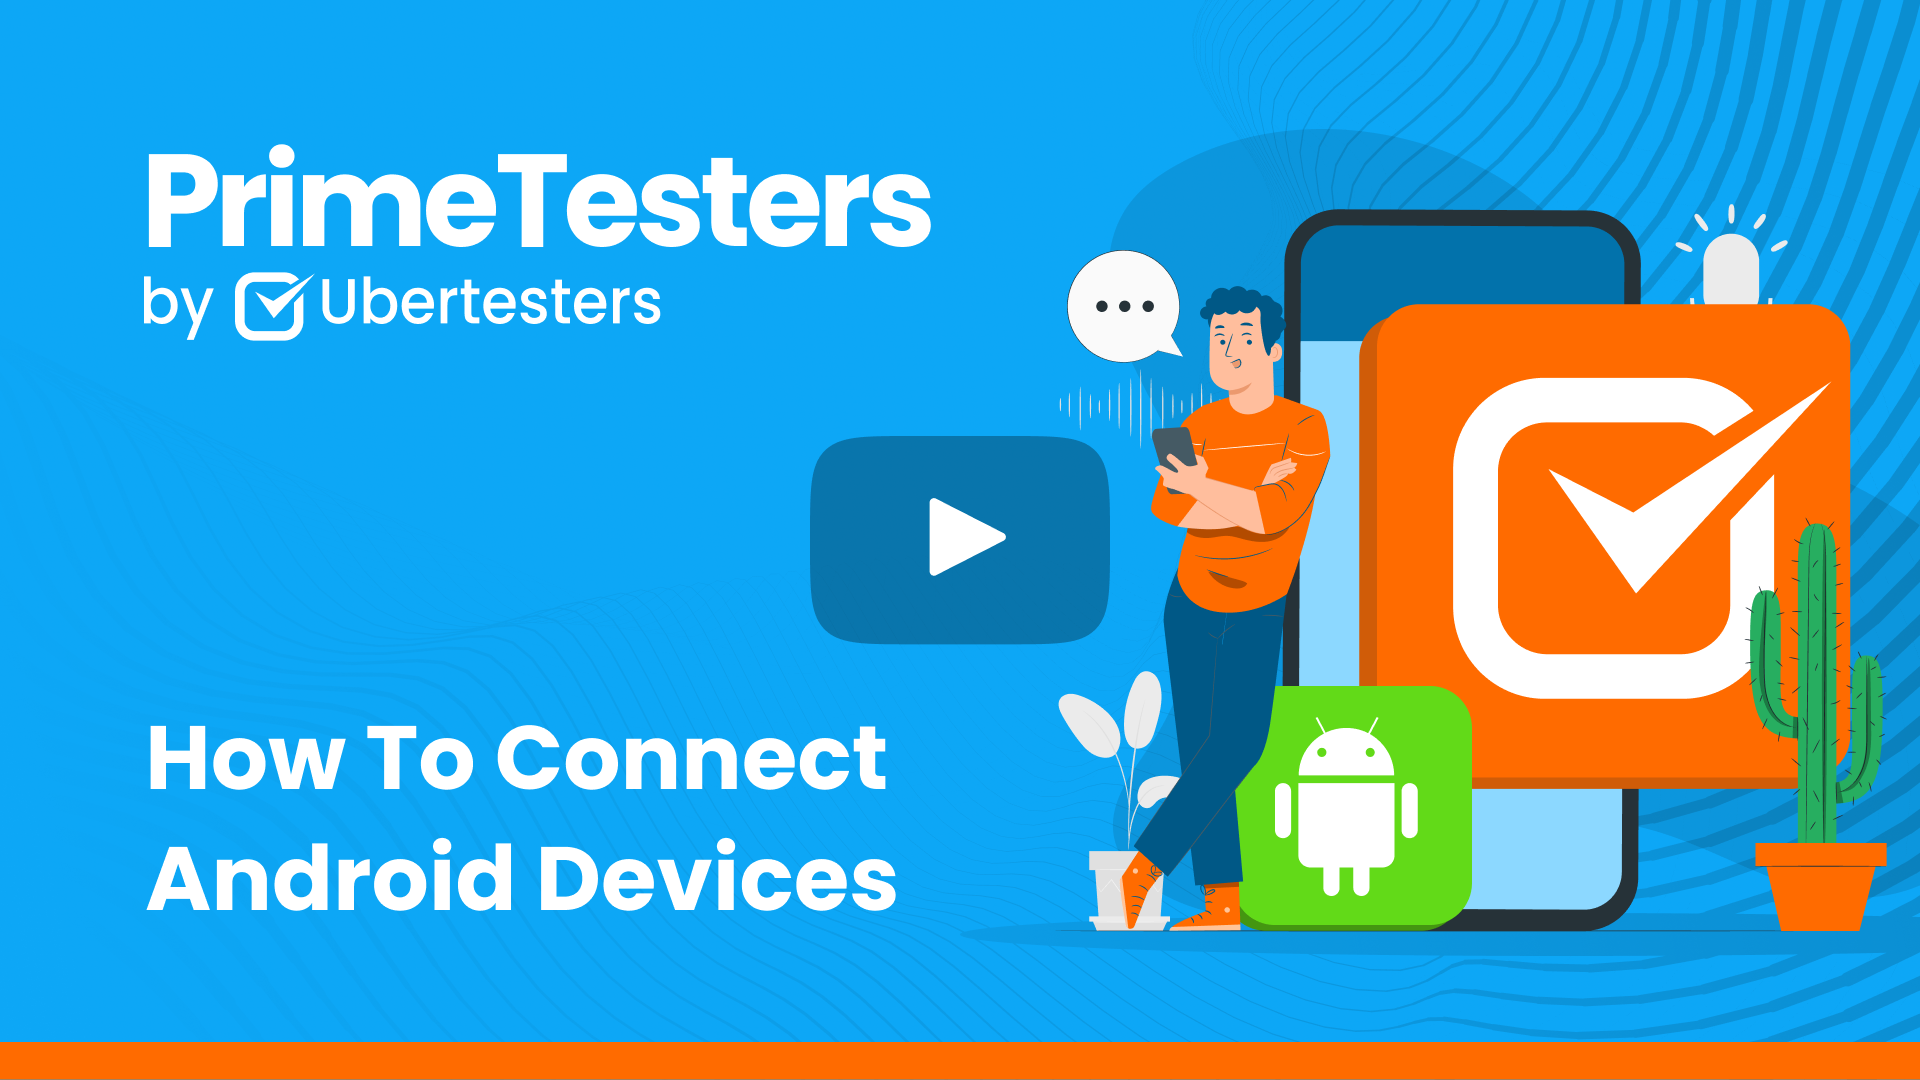 How To Connect Android Devices On The Ubertesters Platform